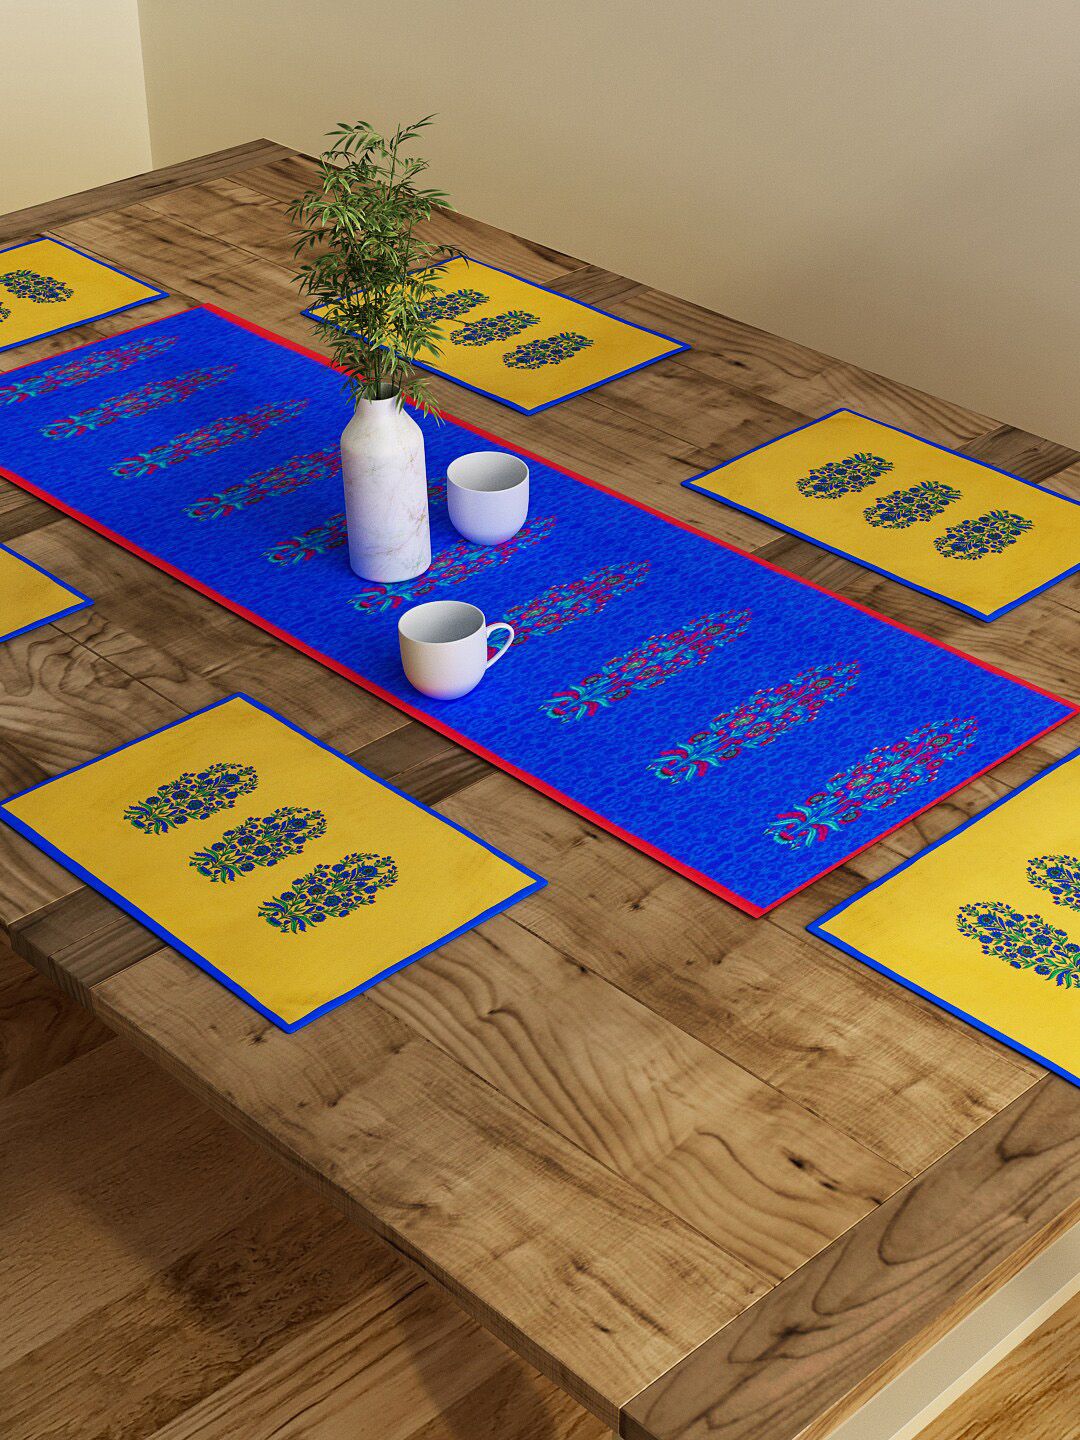 SEJ by Nisha Gupta Set of 6 Blue Table Placemats & Runner Price in India